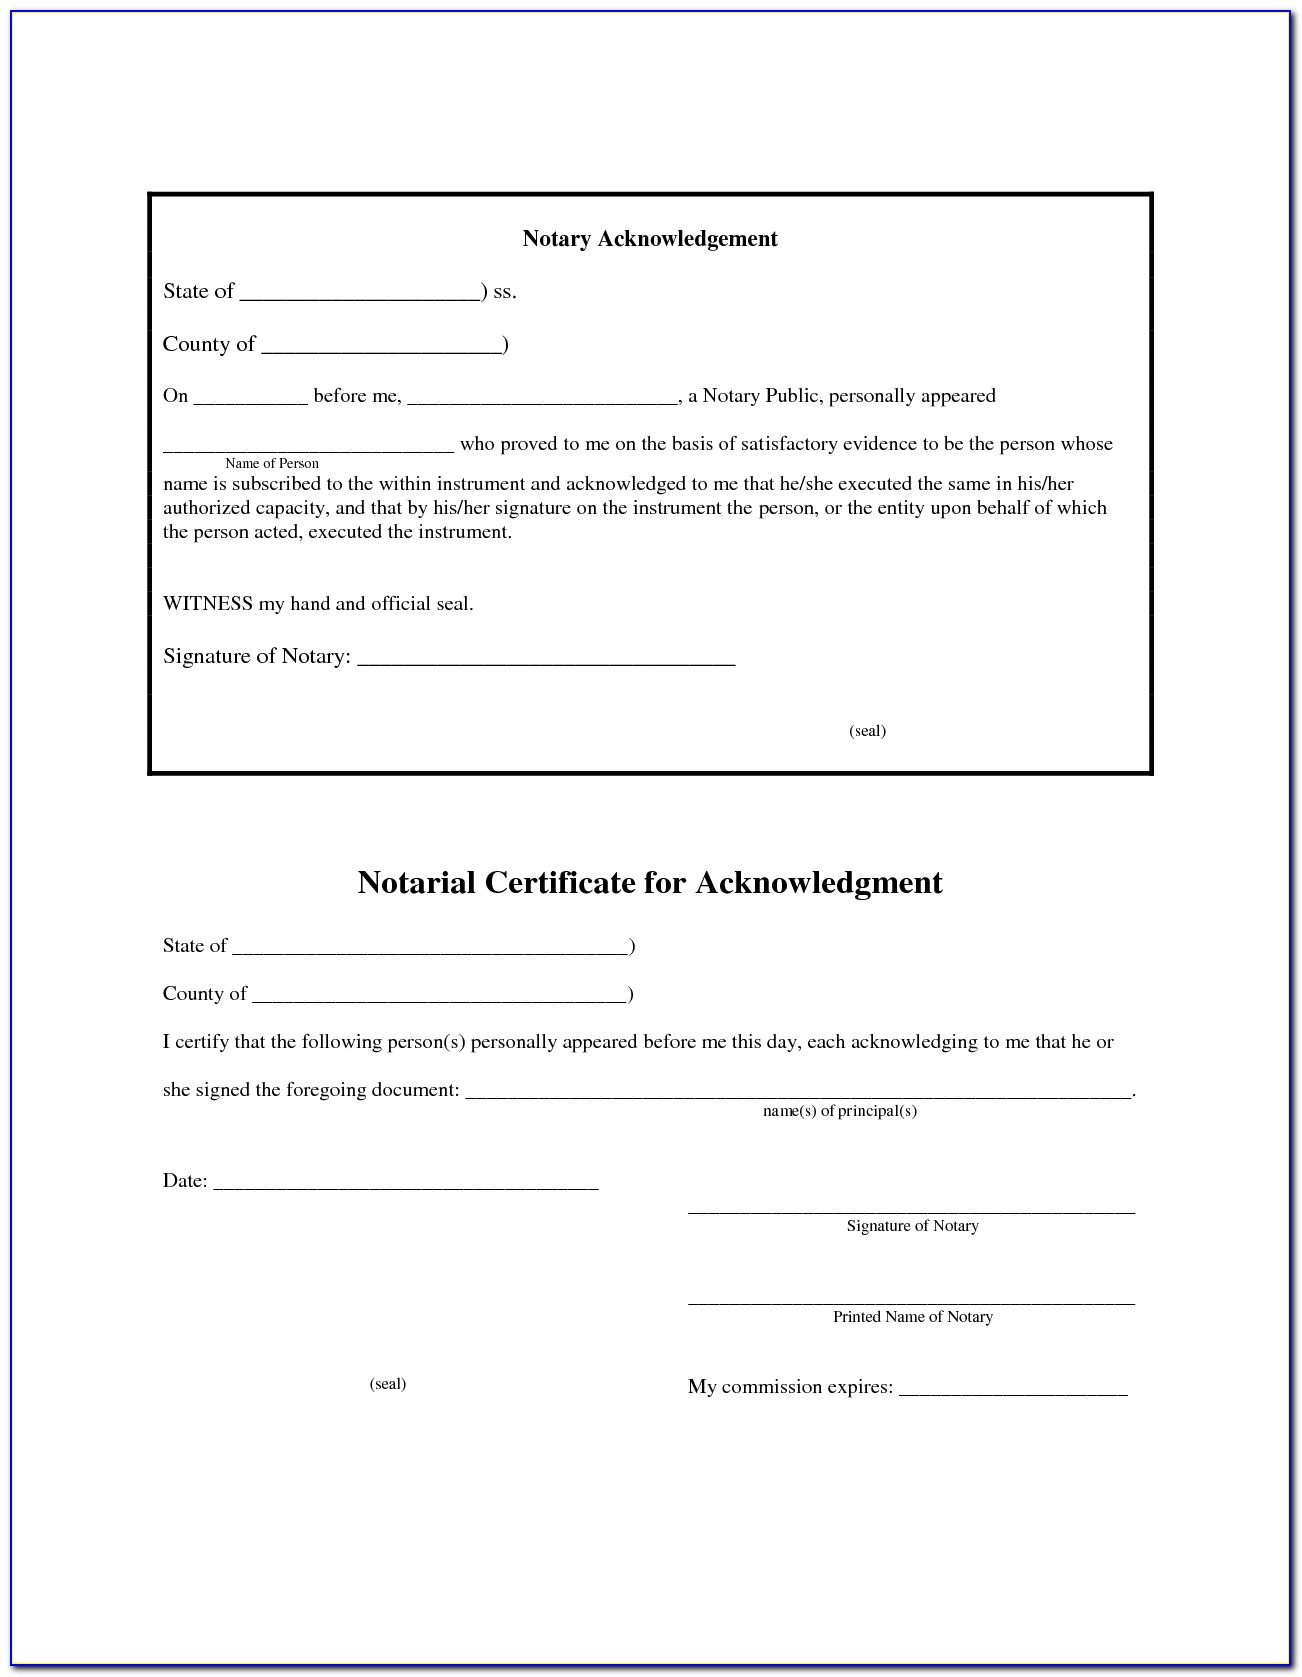 Notary Acknowledgement Forms